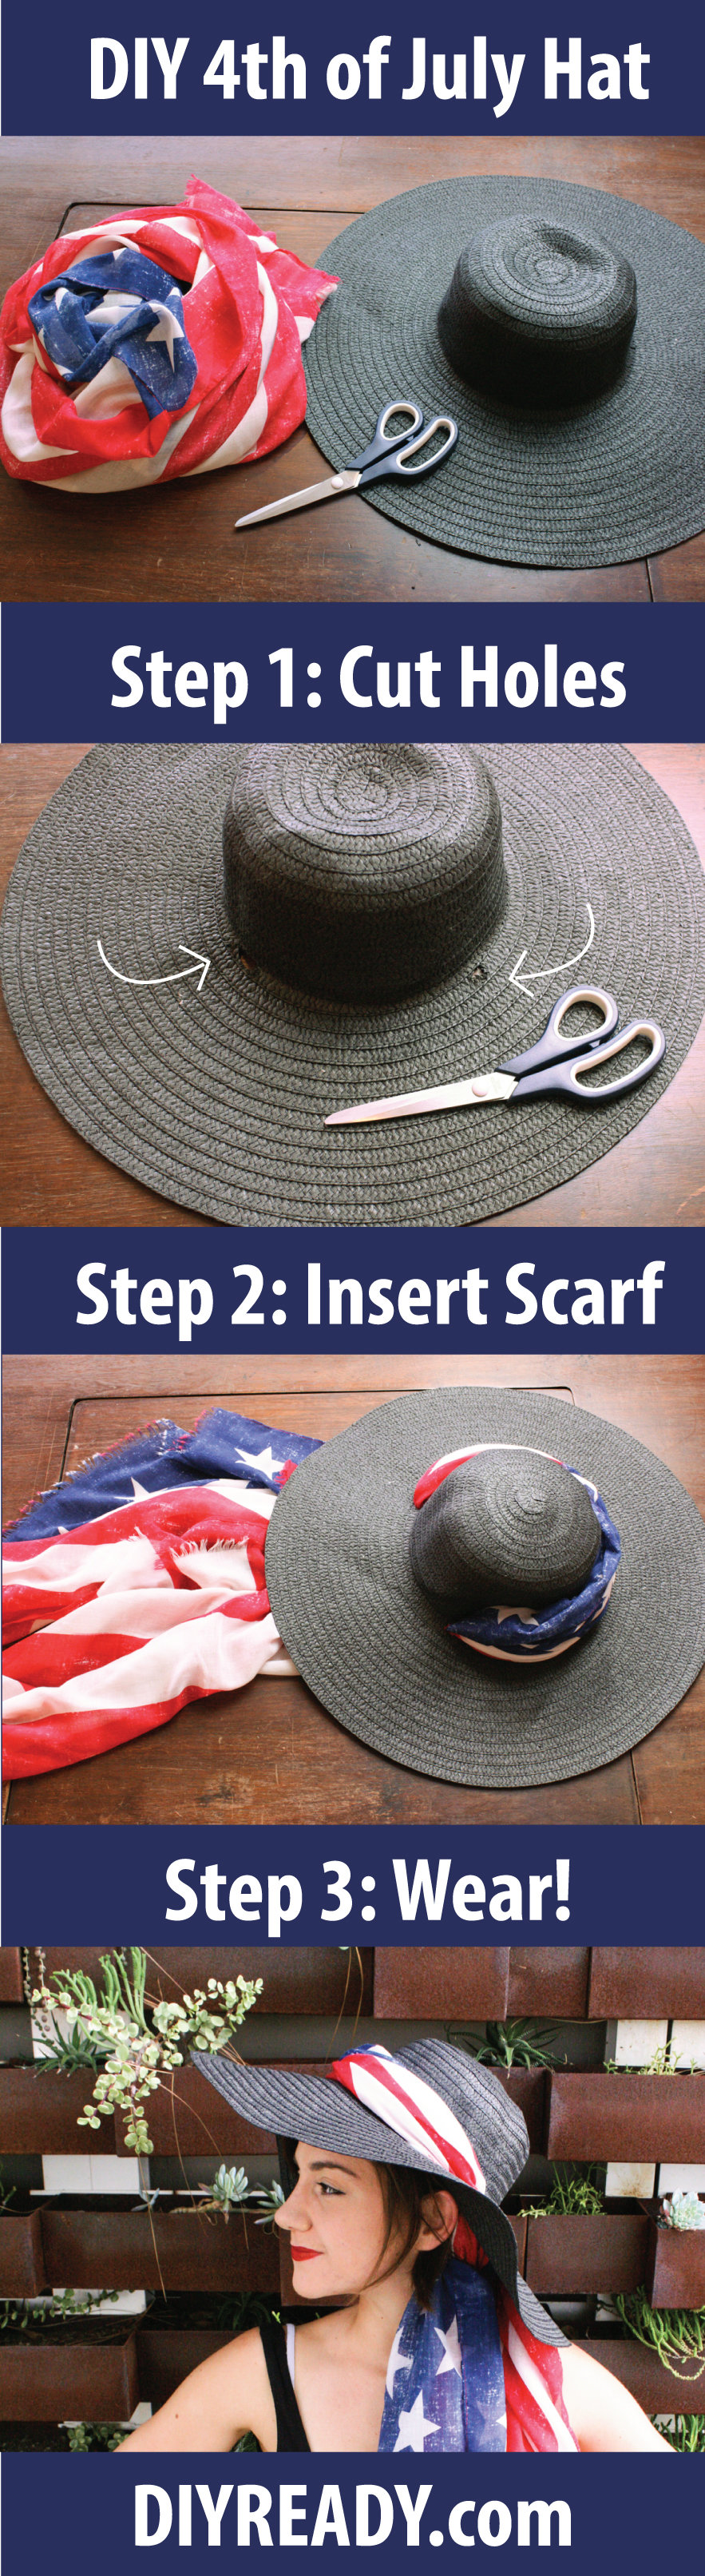 Check out 4th of July | Make Your Own American Flag Hat at https://diyprojects.com/4th-july-craft-projects-make-own-american-flag-hat/